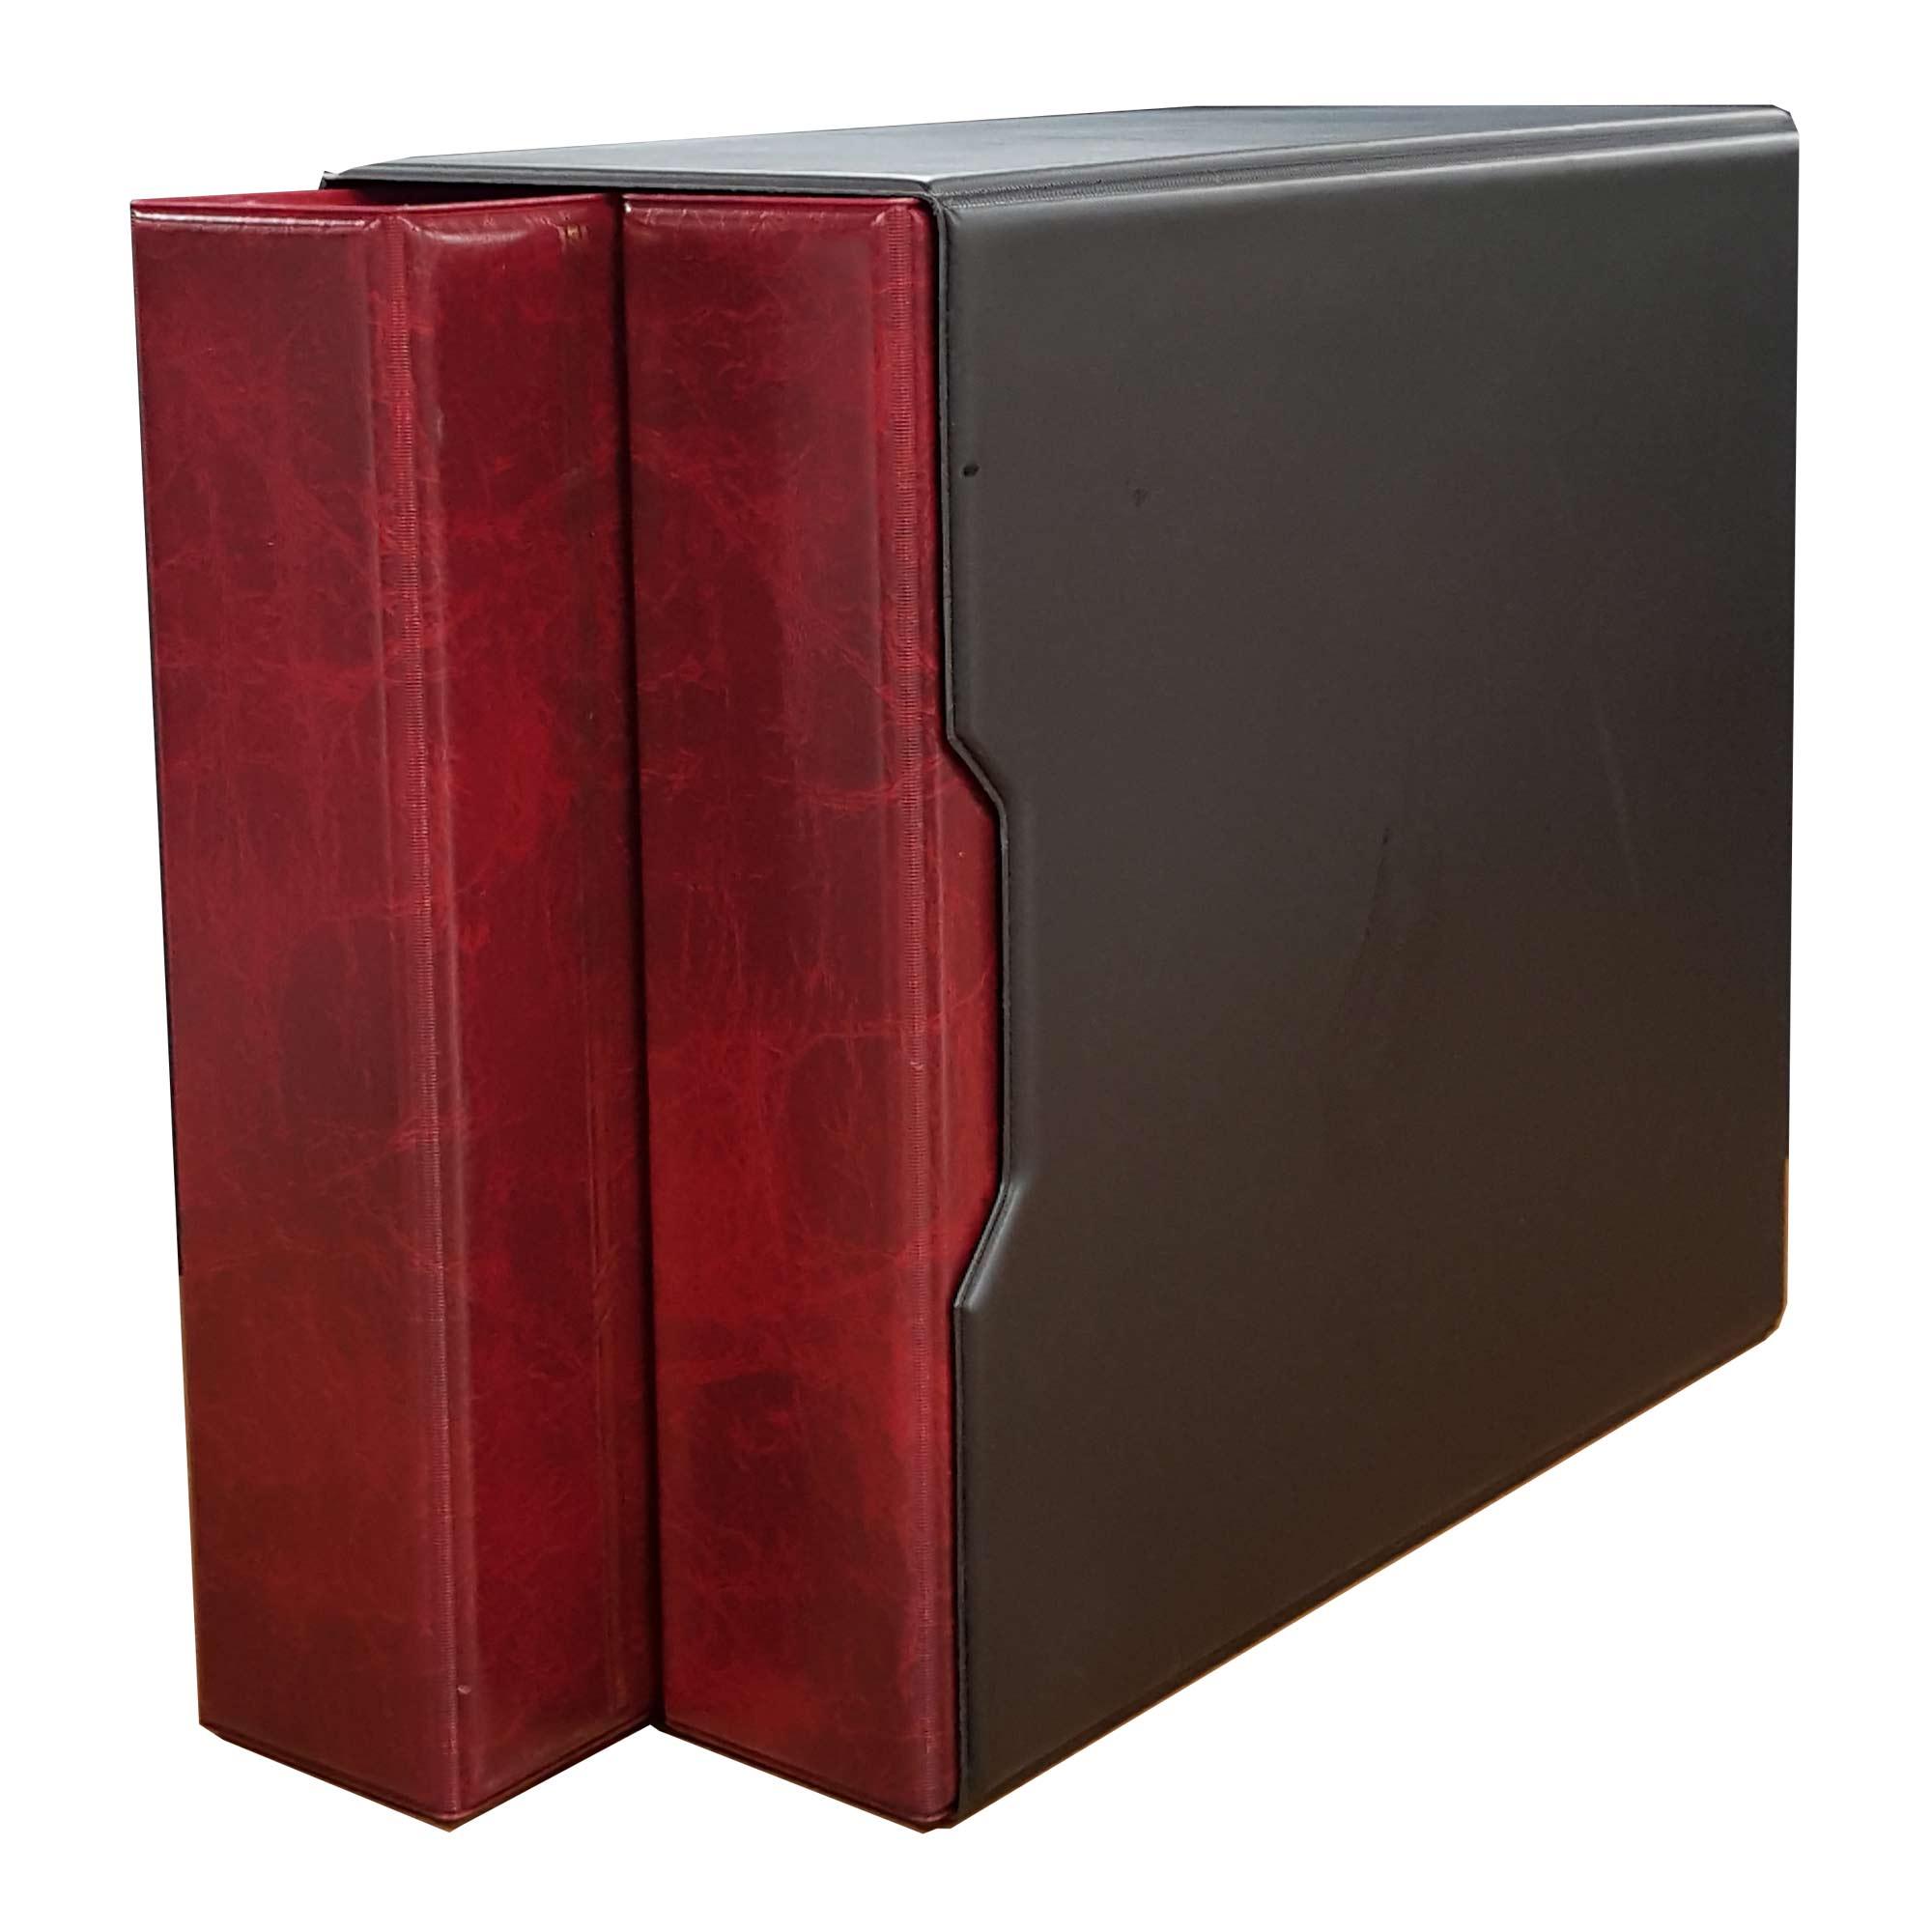 Gallery CD/DVD Double Album Set with Wine Albums and Black Slipcase